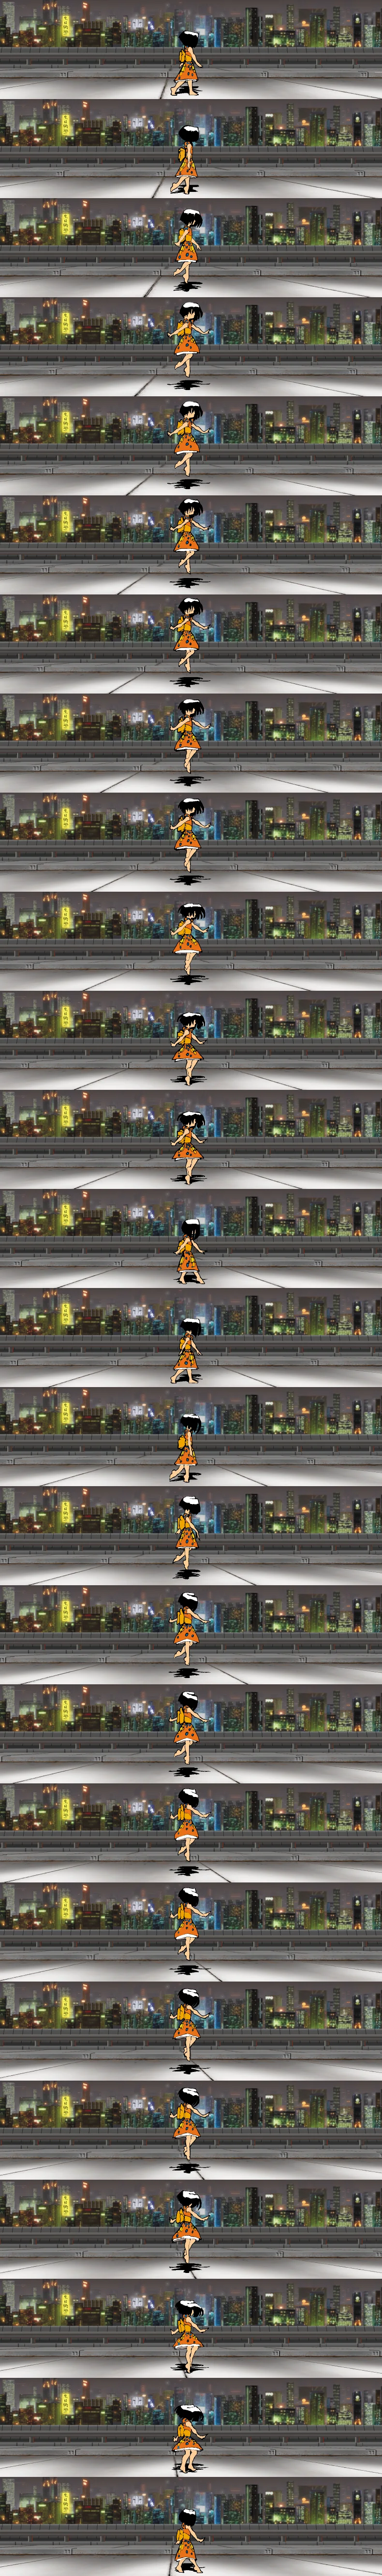 Animated loop of a girl skipping through a big city.